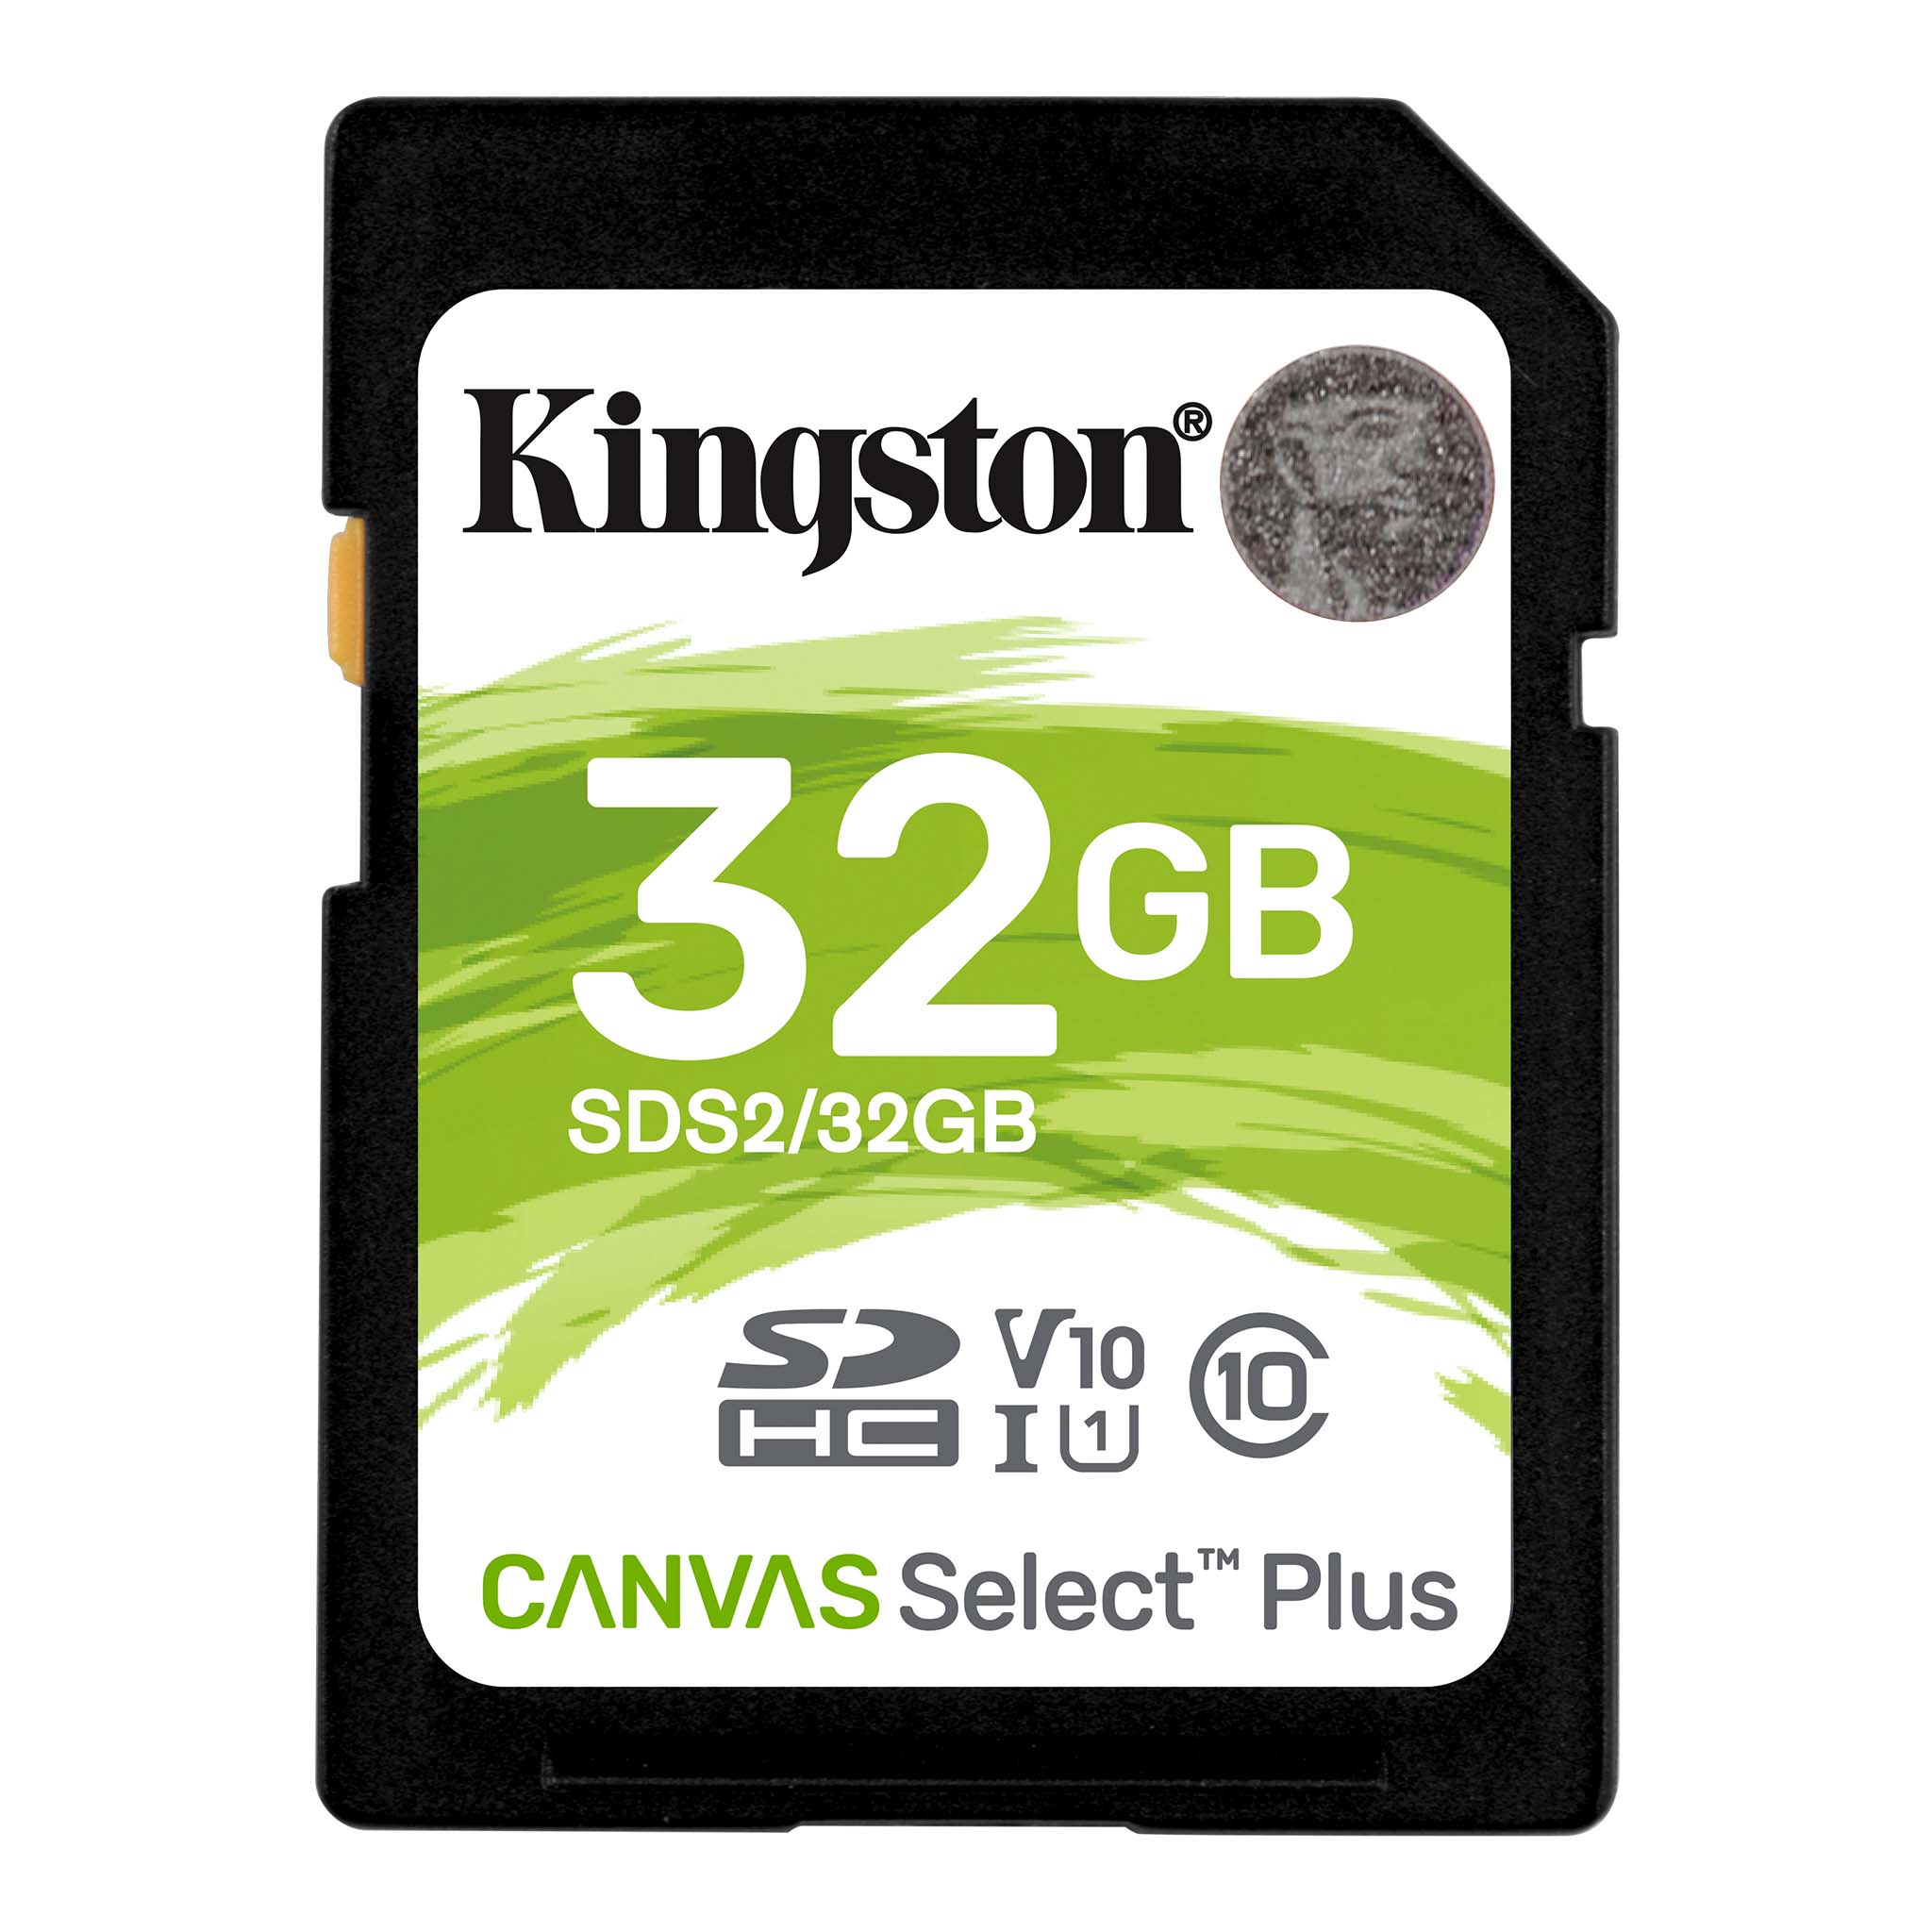 100MBs Works with Kingston Kingston 32GB Kyocera Hydro XTRM MicroSDHC Canvas Select Plus Card Verified by SanFlash. 